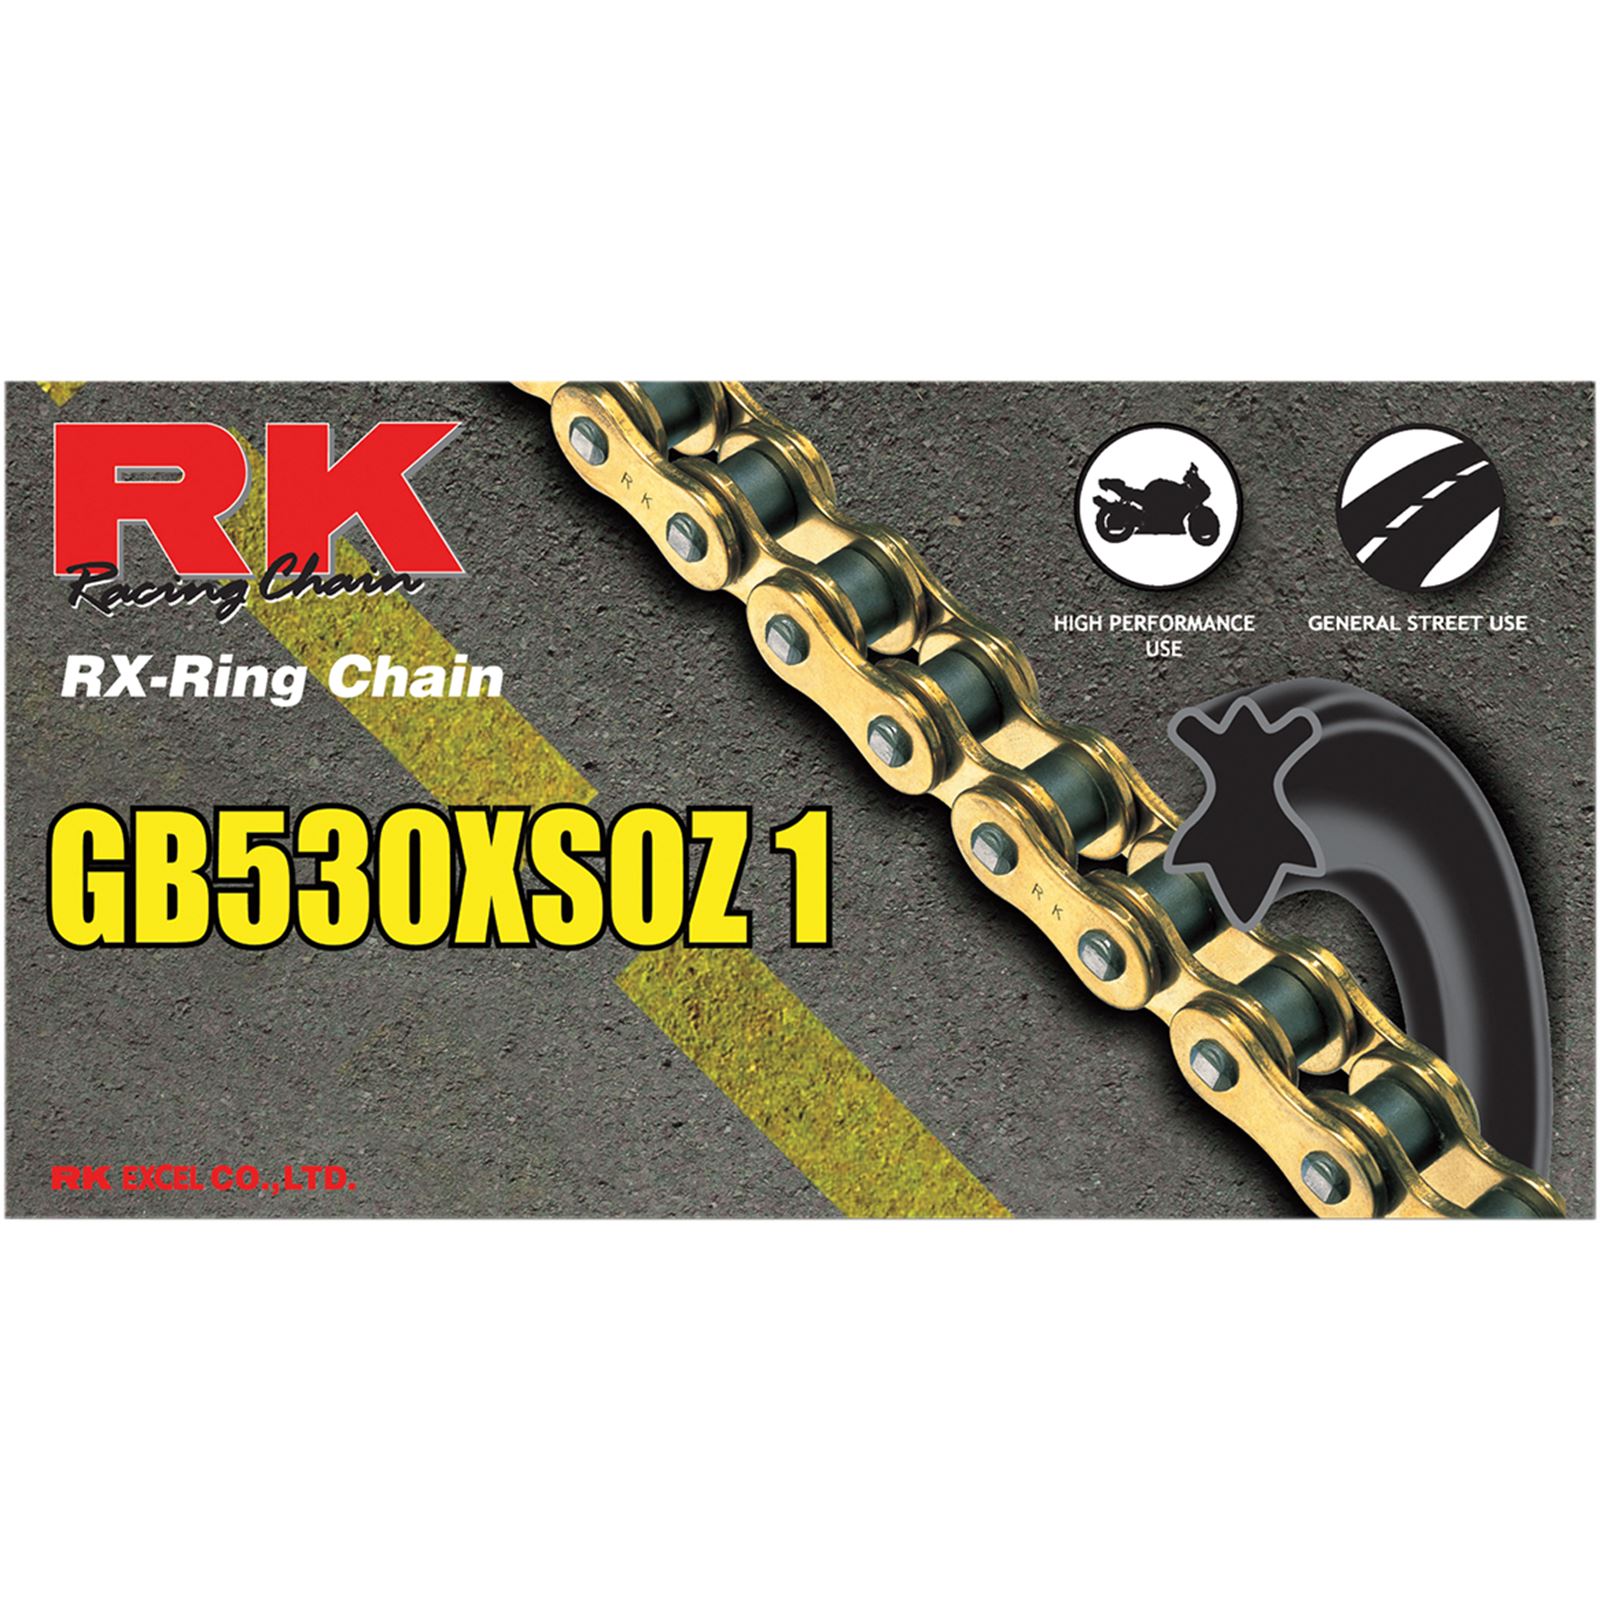 RK Excel GB 530 XSO - Chain - 110 Links